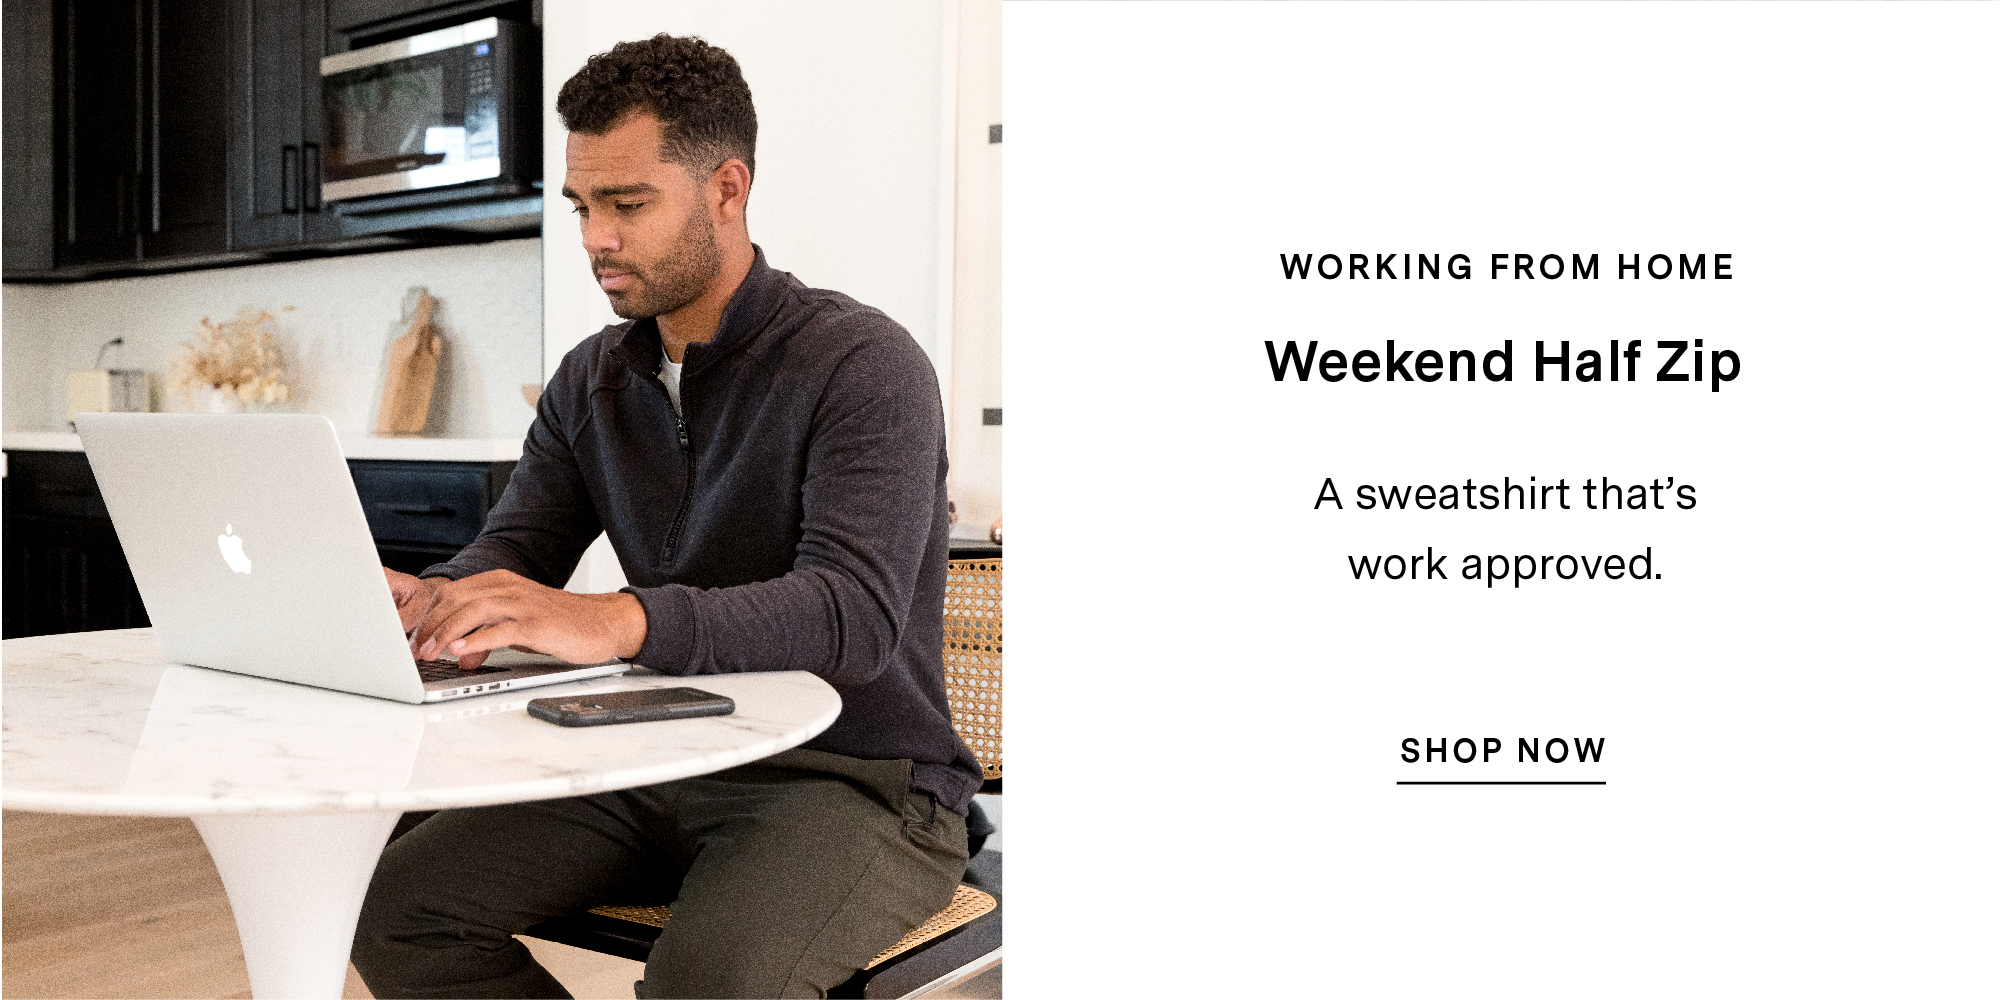 WORKING FROM HOME. Weekend Half Zip. A sweatshirt that''s work approved. SHOP NOW